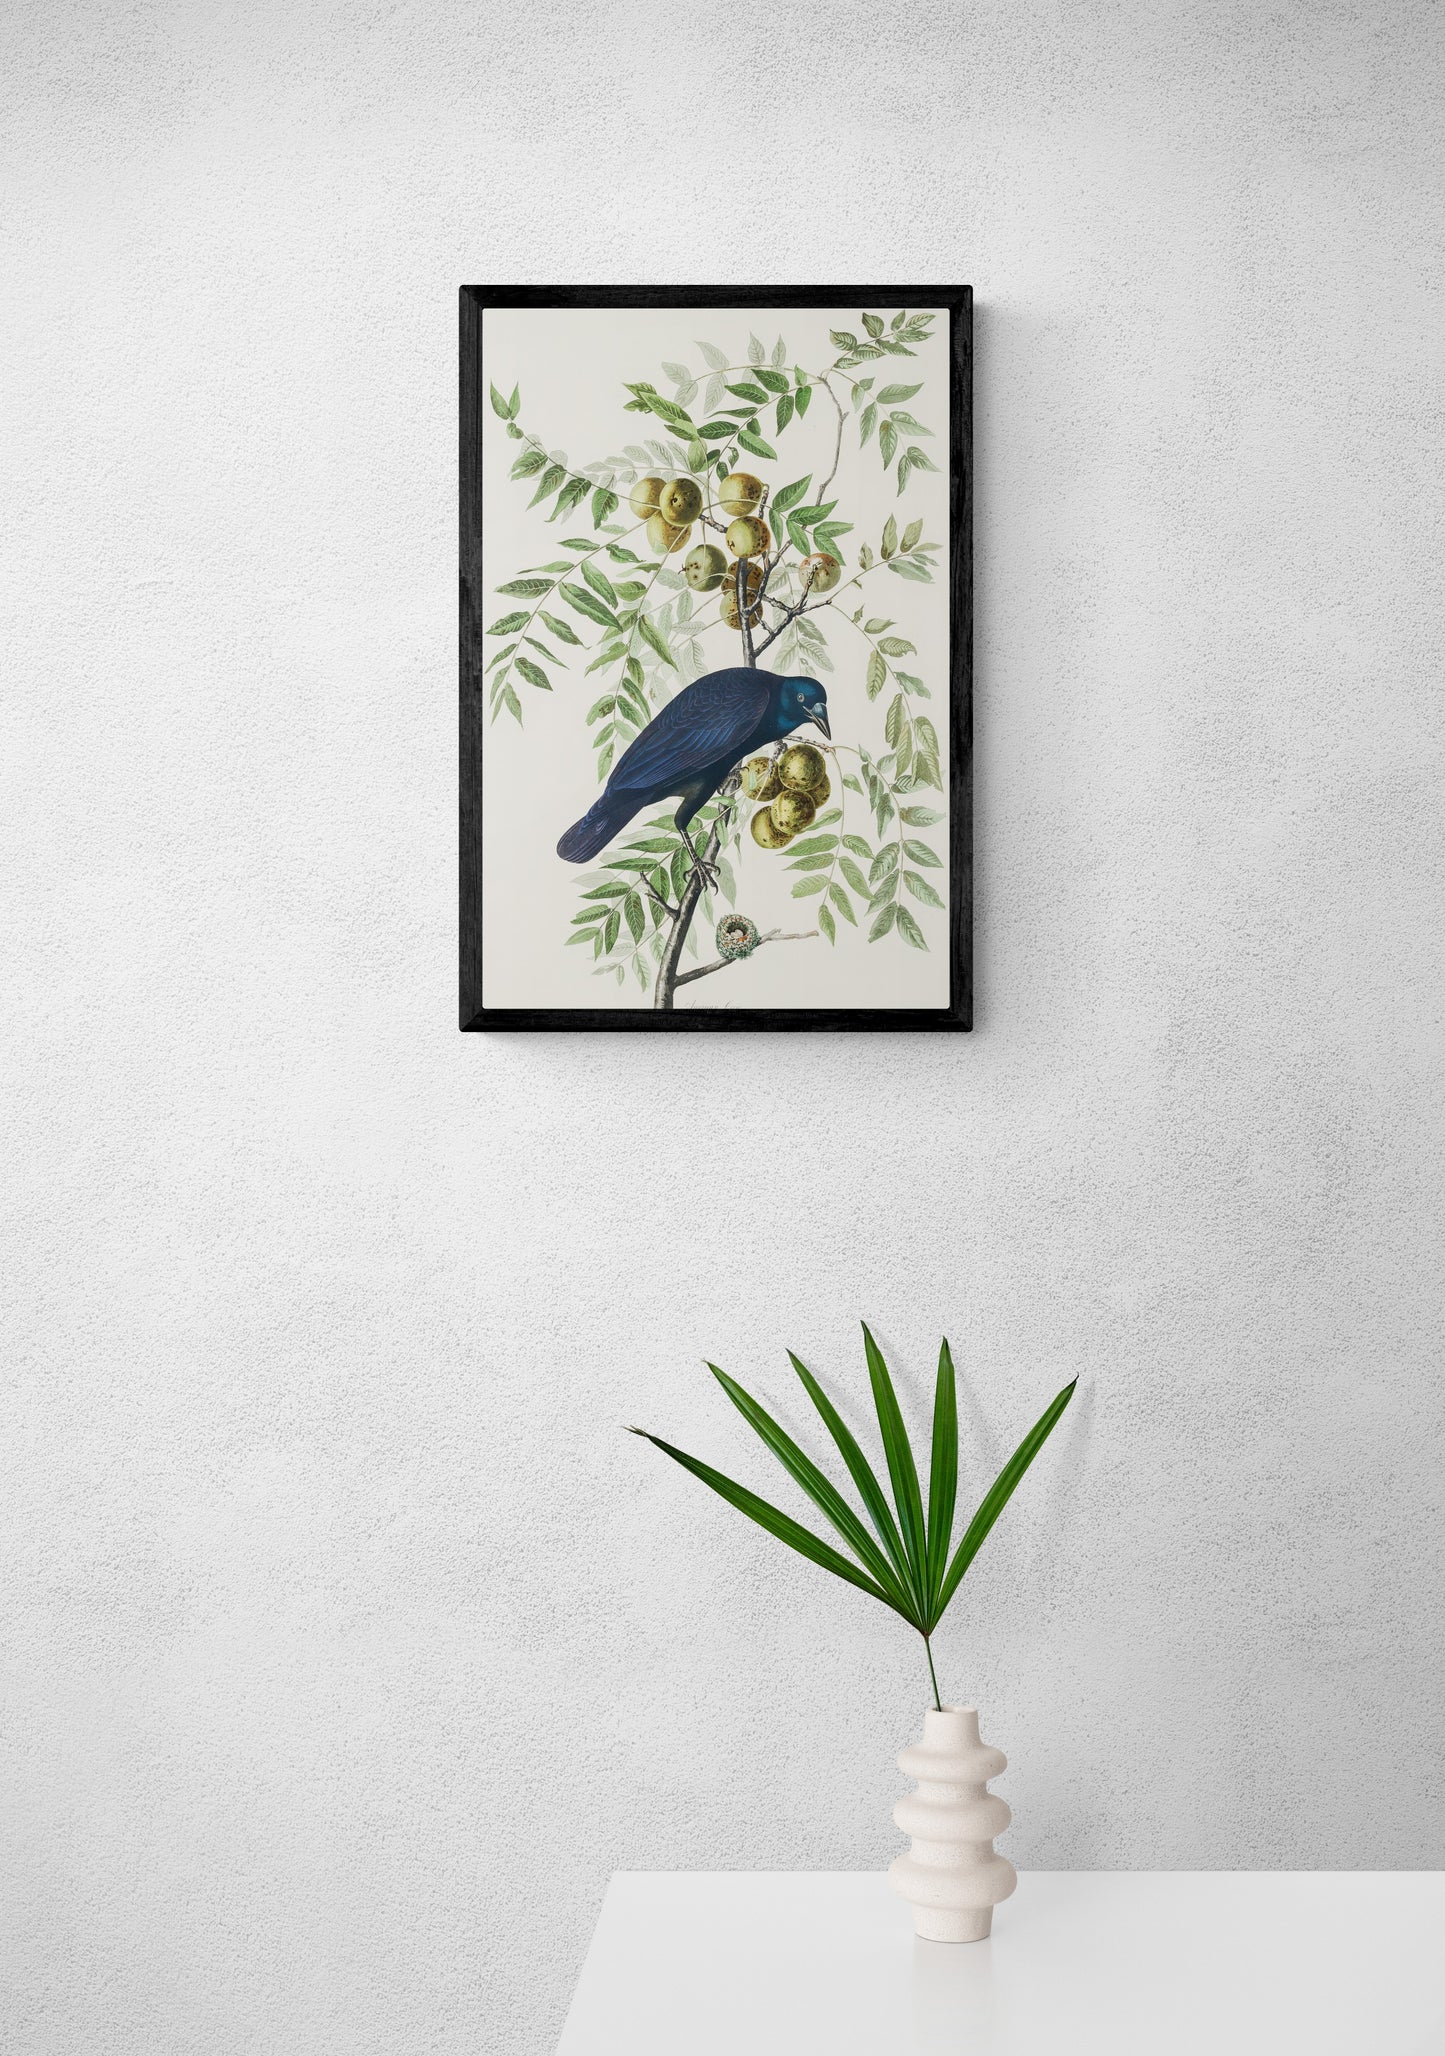 Vintage naturalistic bird illustrations: American Crow. Prints on art paper, canvas, and framed canvas. Free shipping in the USA. SKUJJA003